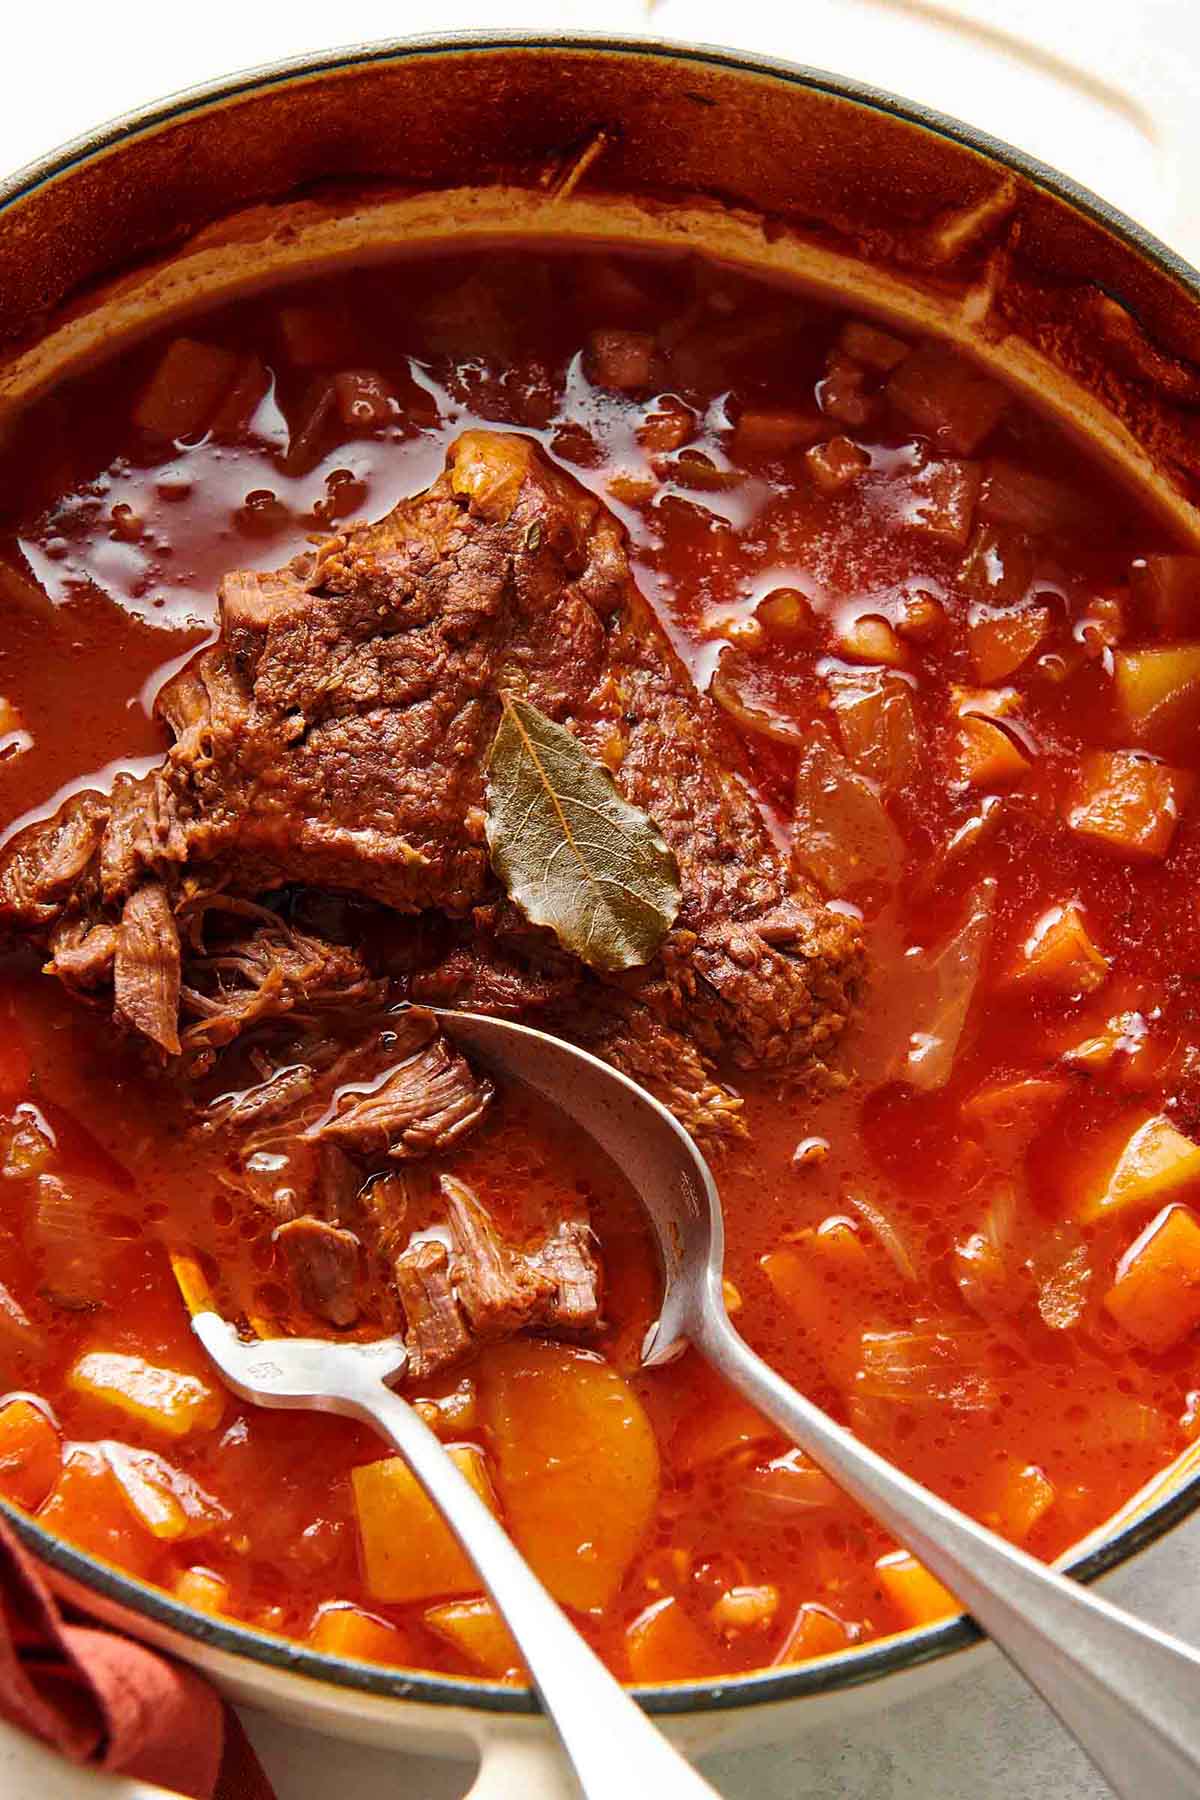 Dutch oven pot roast with shredded meat and broth.